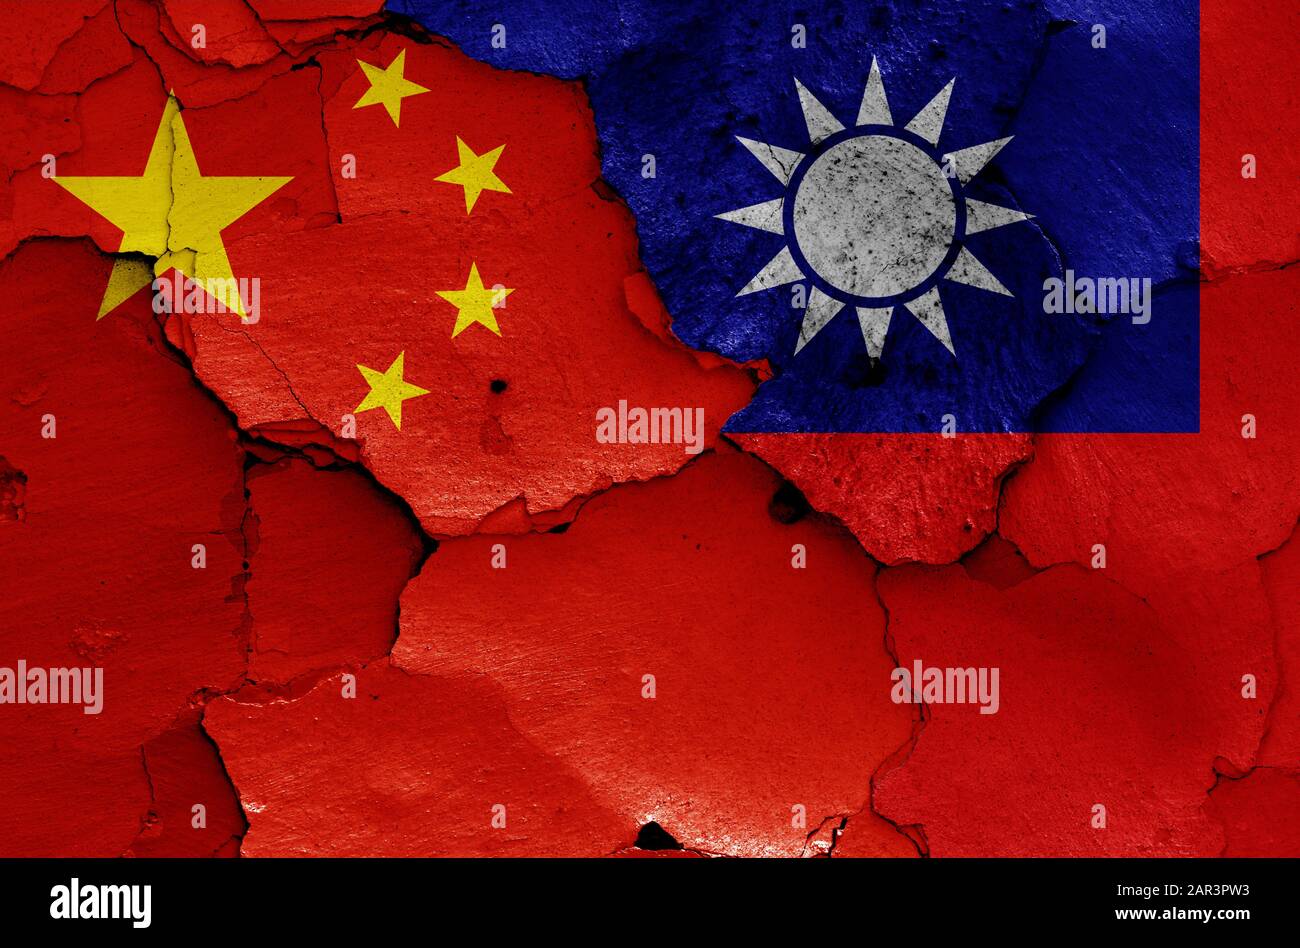 flags of China and Taiwan painted on cracked wall Stock Photo